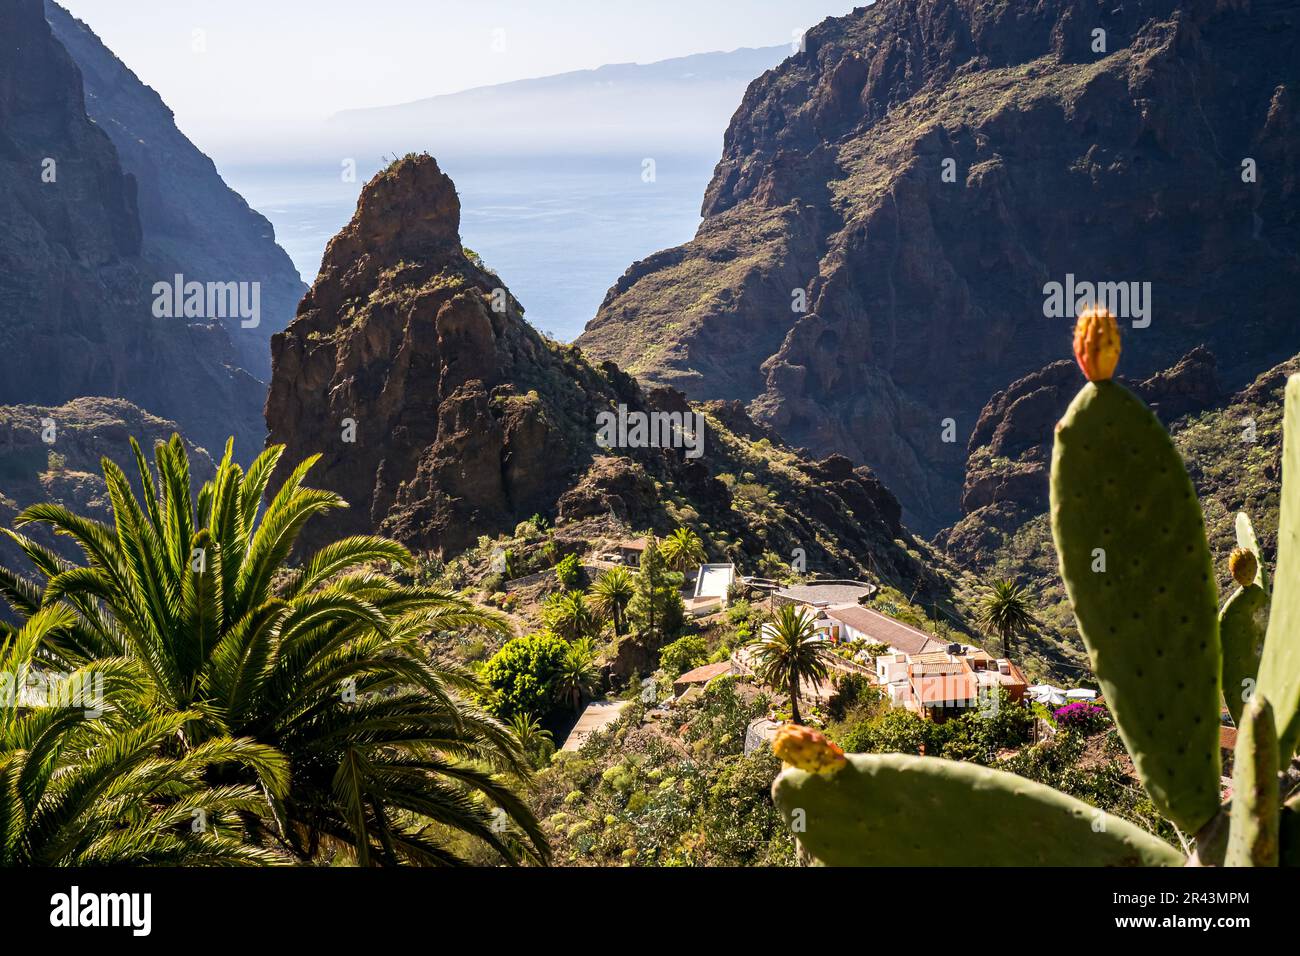 Barranco de Masca gorge with palm trees and cacti, a hidden gem for nature lovers and adventurers alike, as the Roque de Catana mountain overlooks the Stock Photo